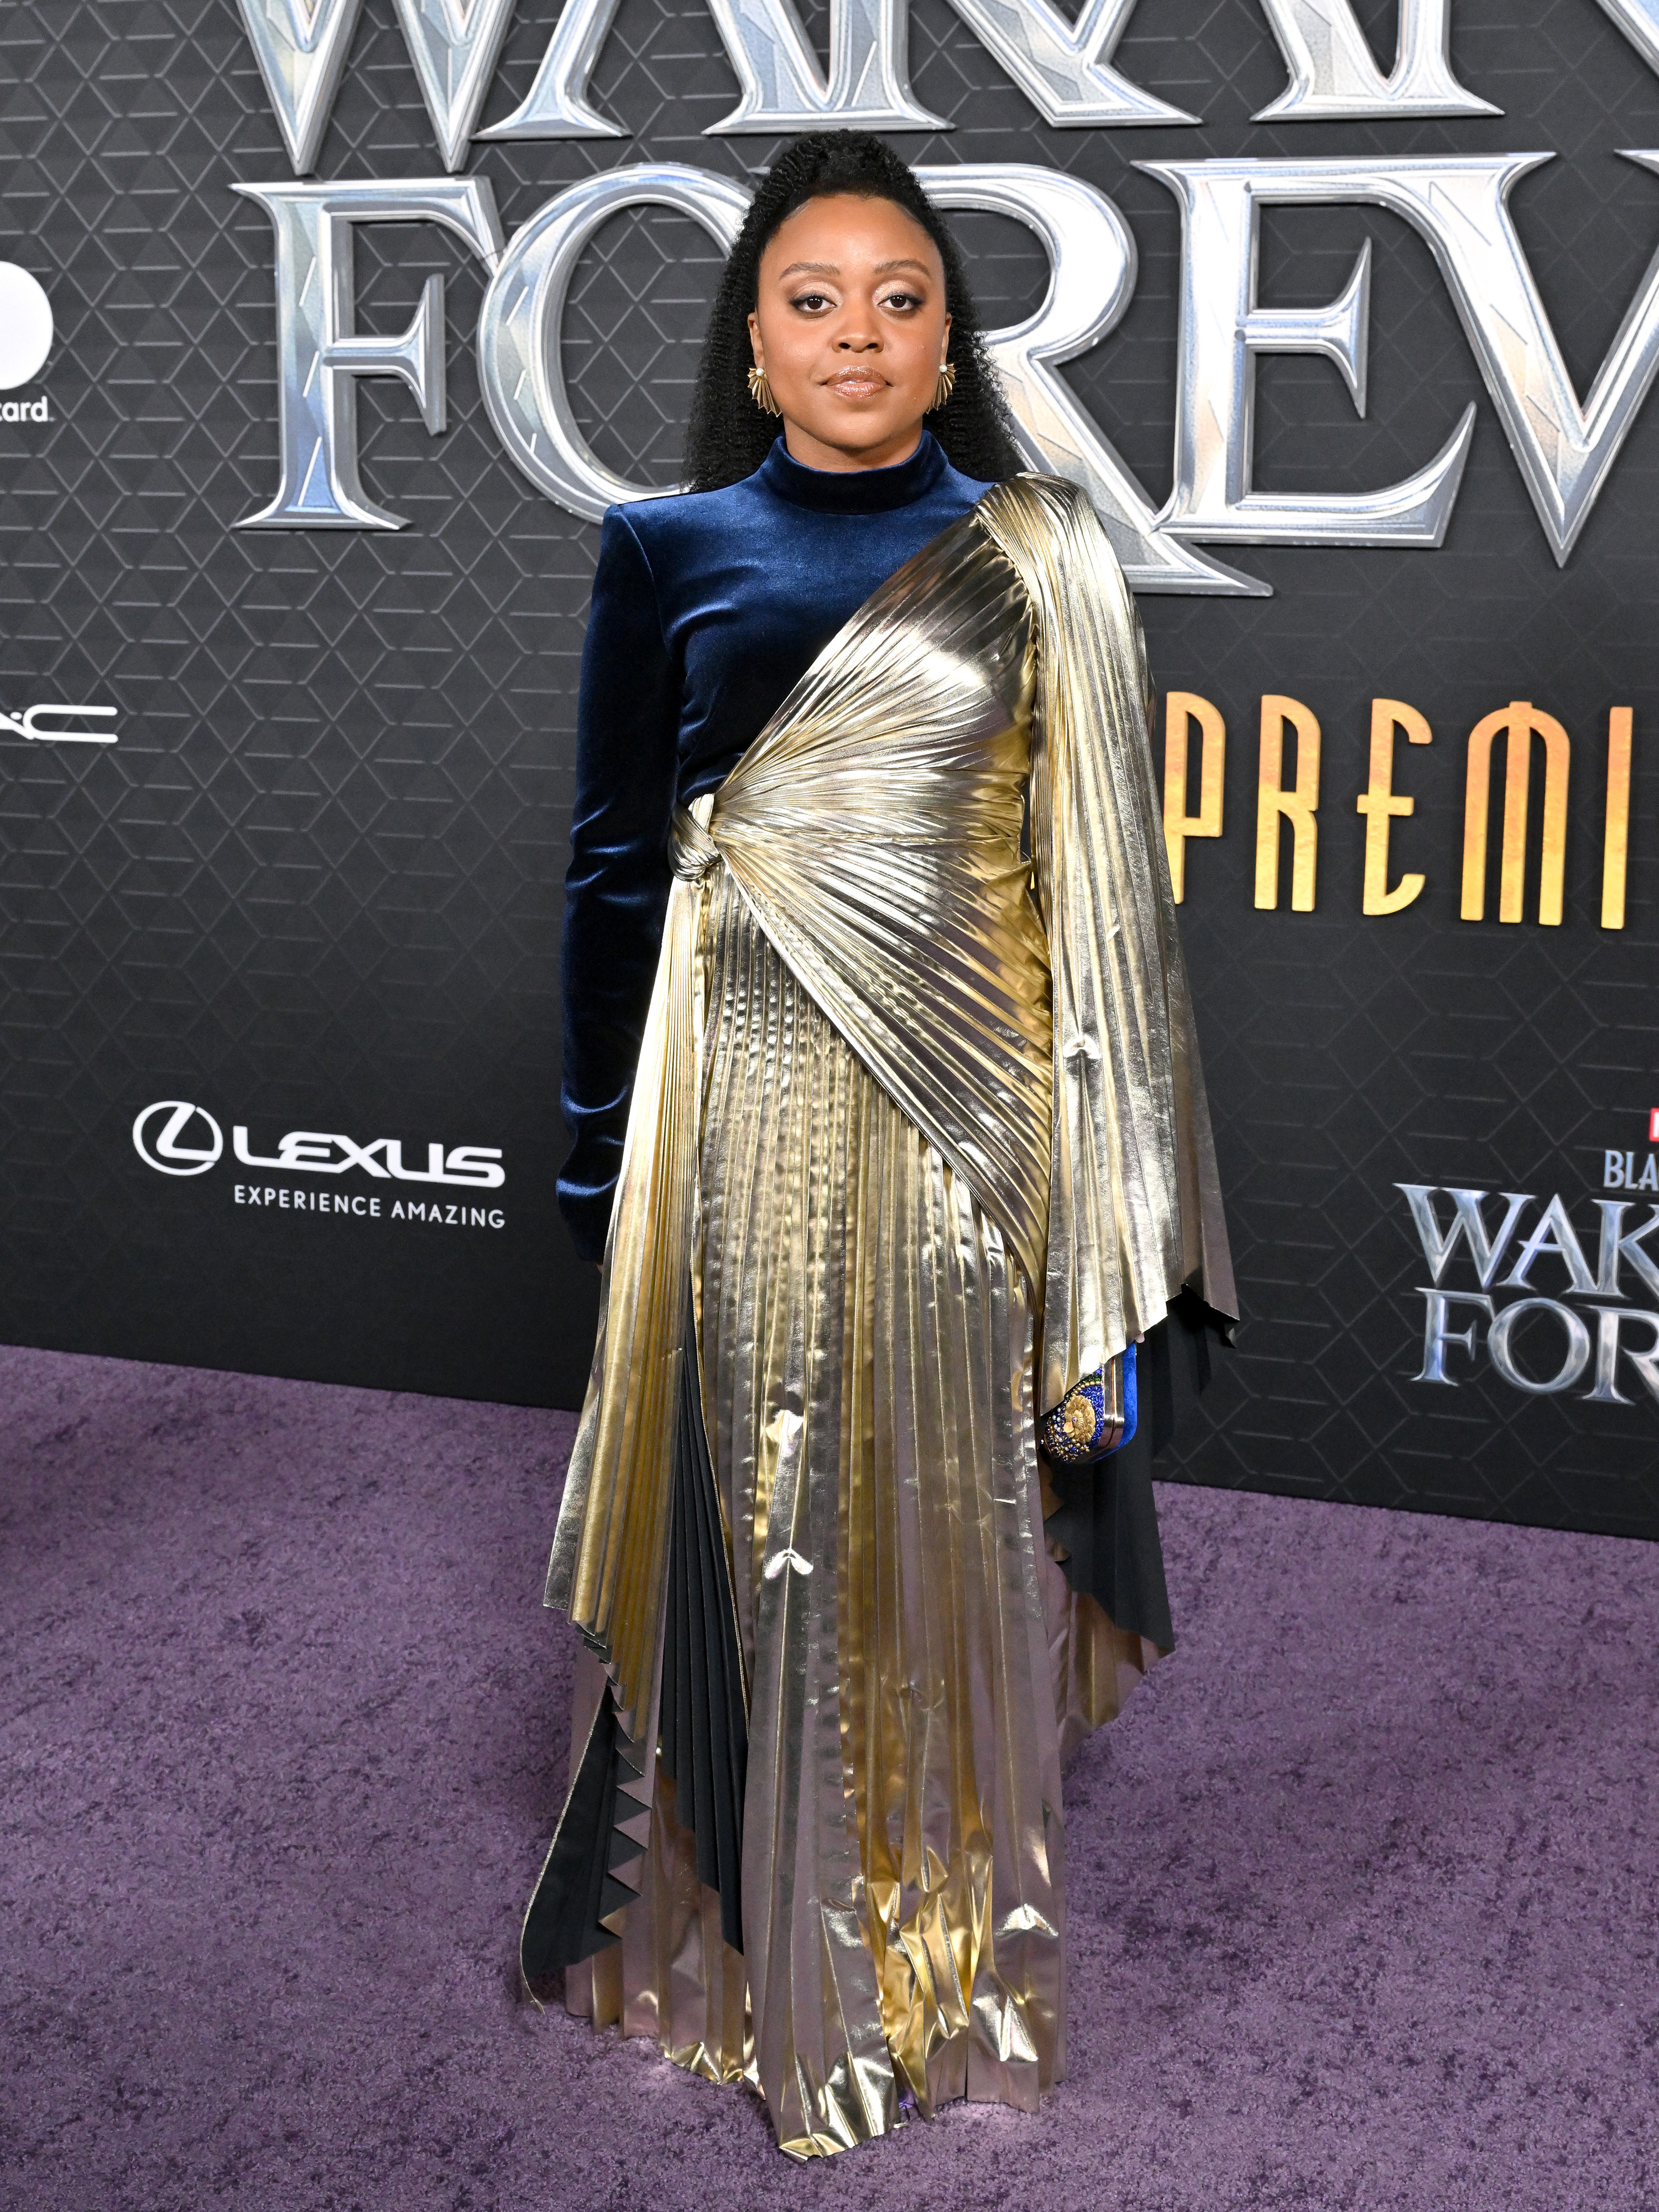 Quinta wore a long-sleeved gown with a pleated metallic overlay on one side